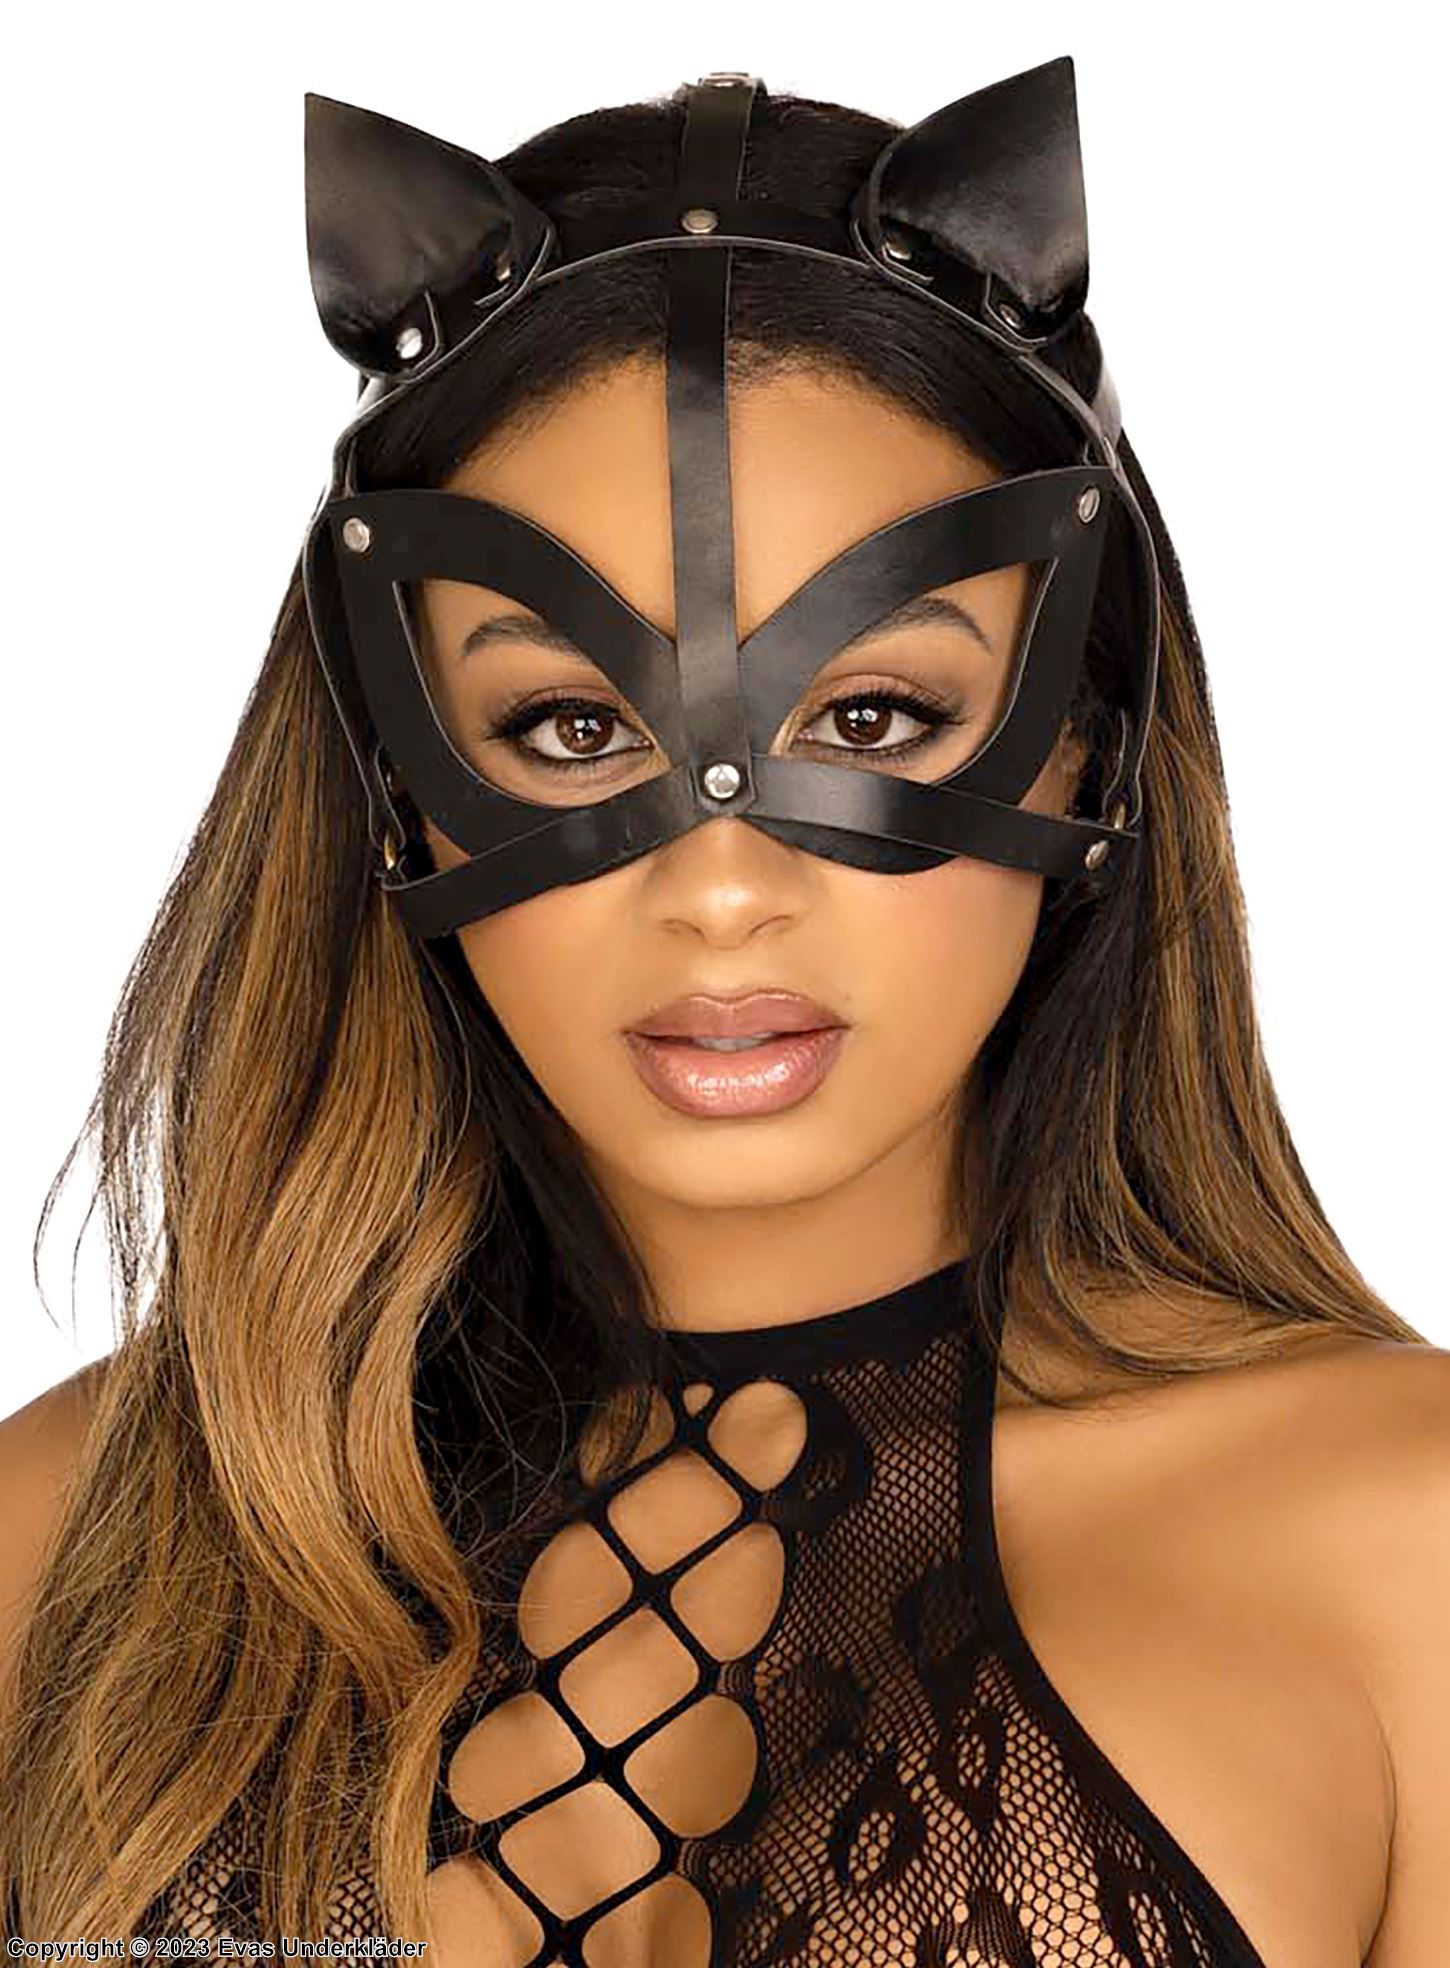 Cat, costume mask, faux leather, studs, ears